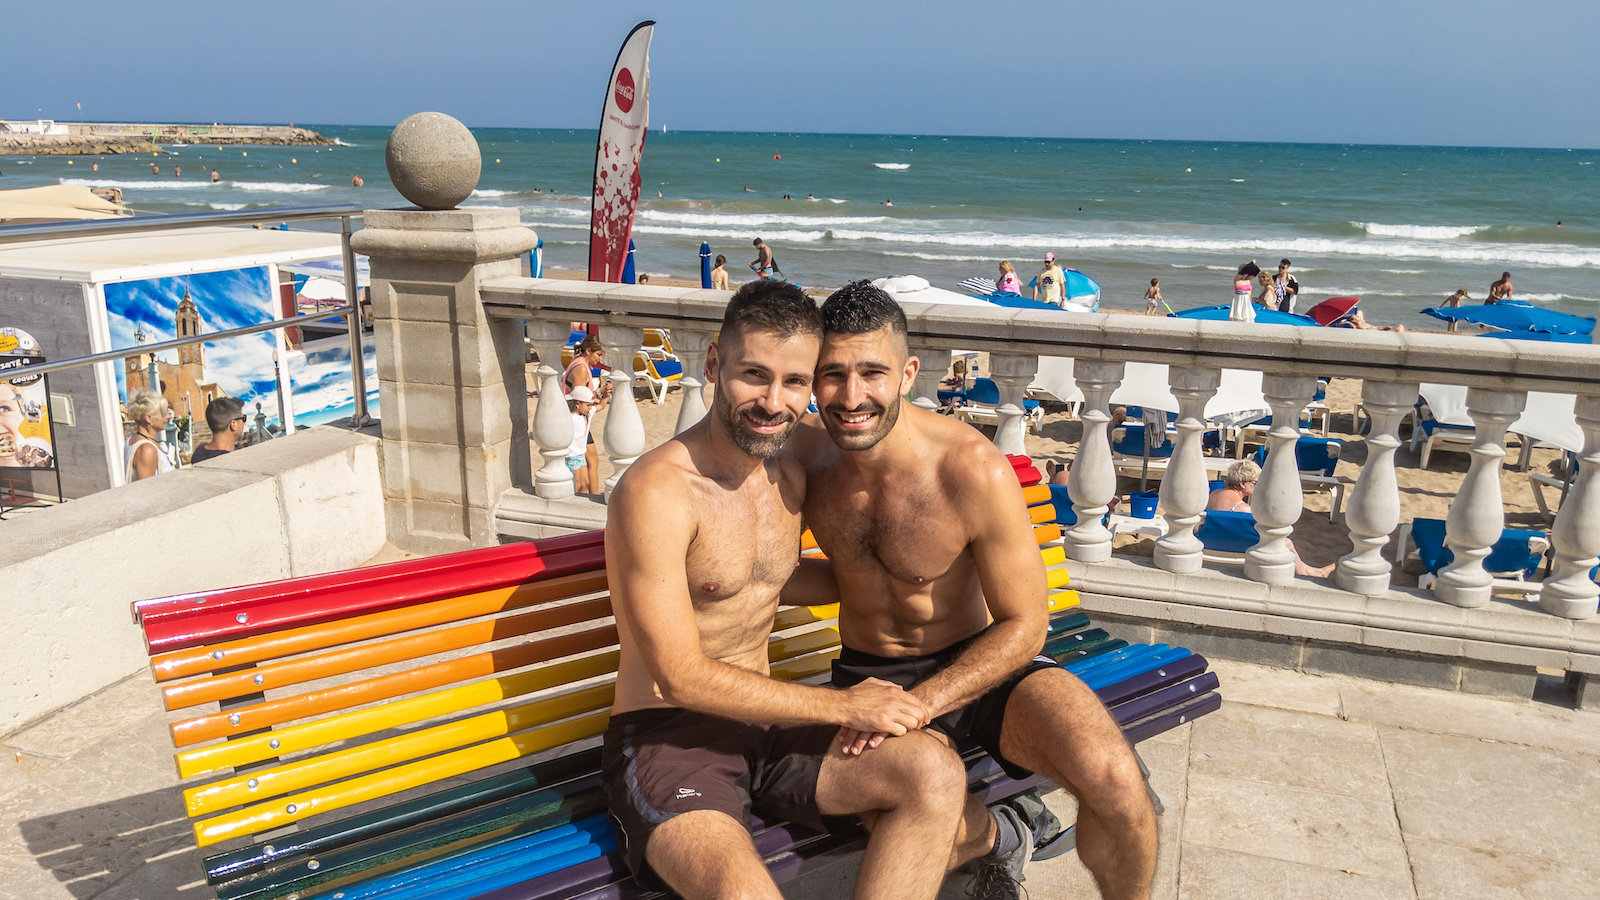 Sitges is an incredibly gay destination, right by the beach